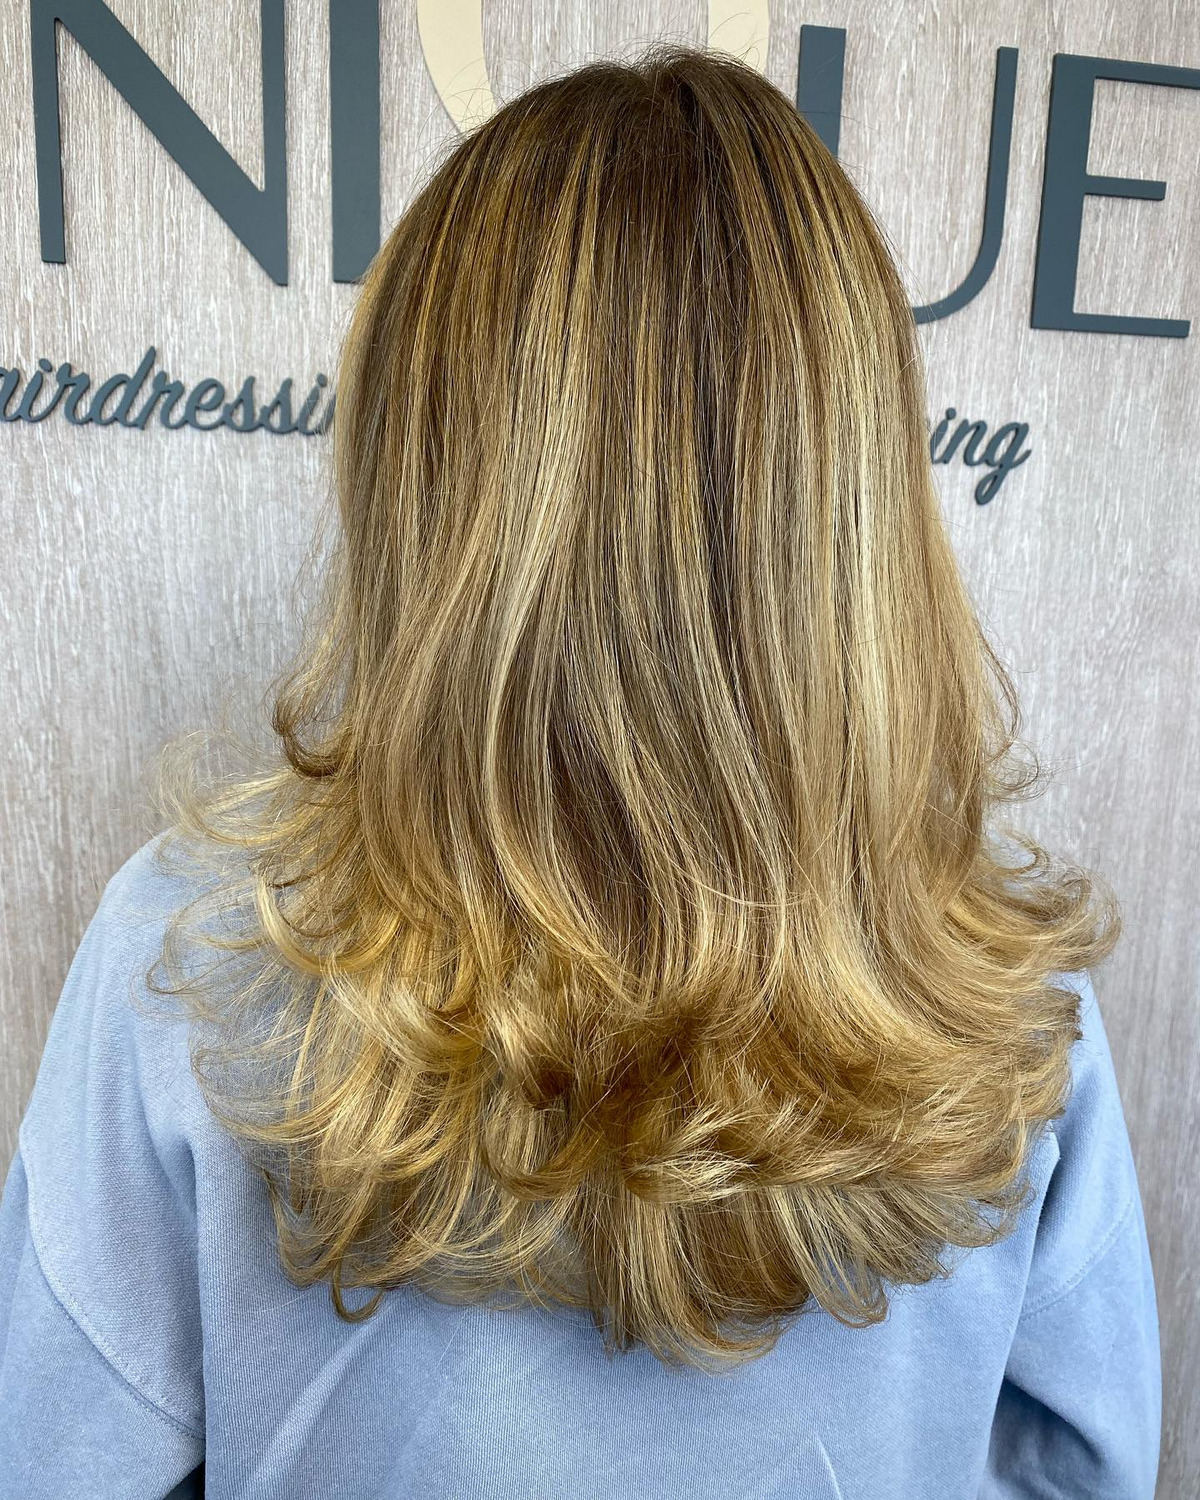 Long Blonde Layered Haircut With Textured Ends 